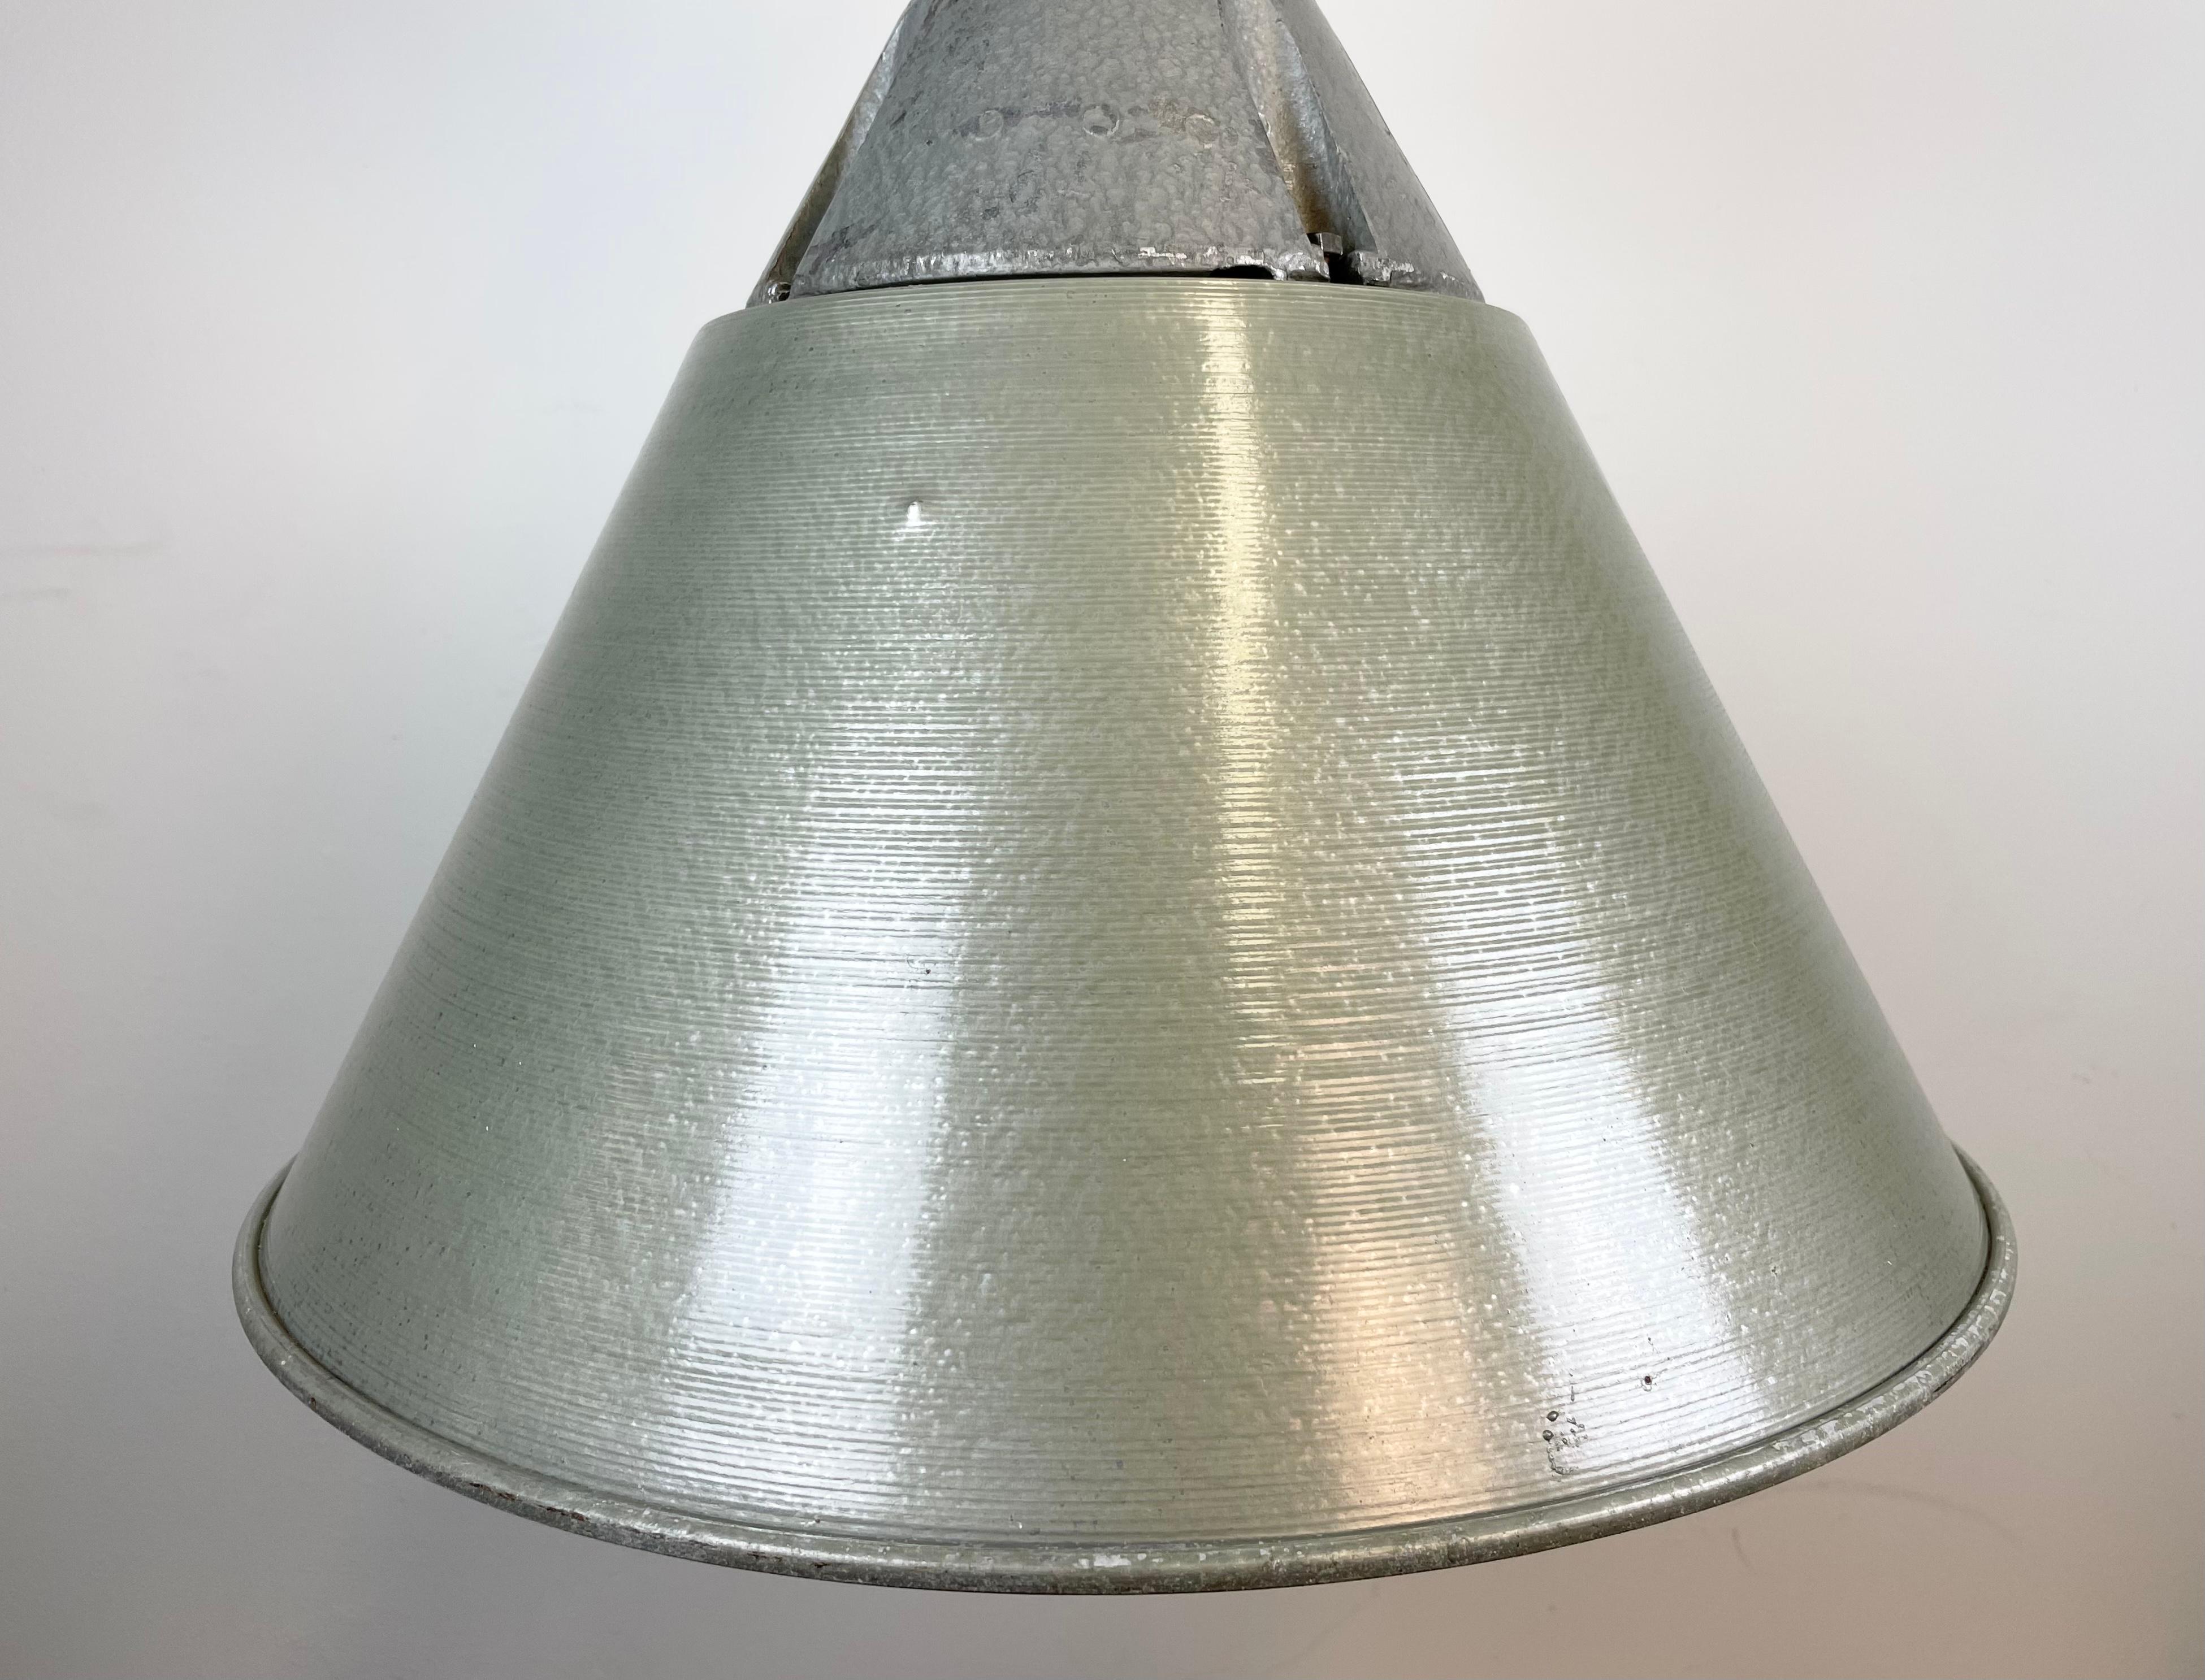 Aluminum Industrial Explosion Proof Lamp with Aluminium Shade from Polam, 1970s For Sale